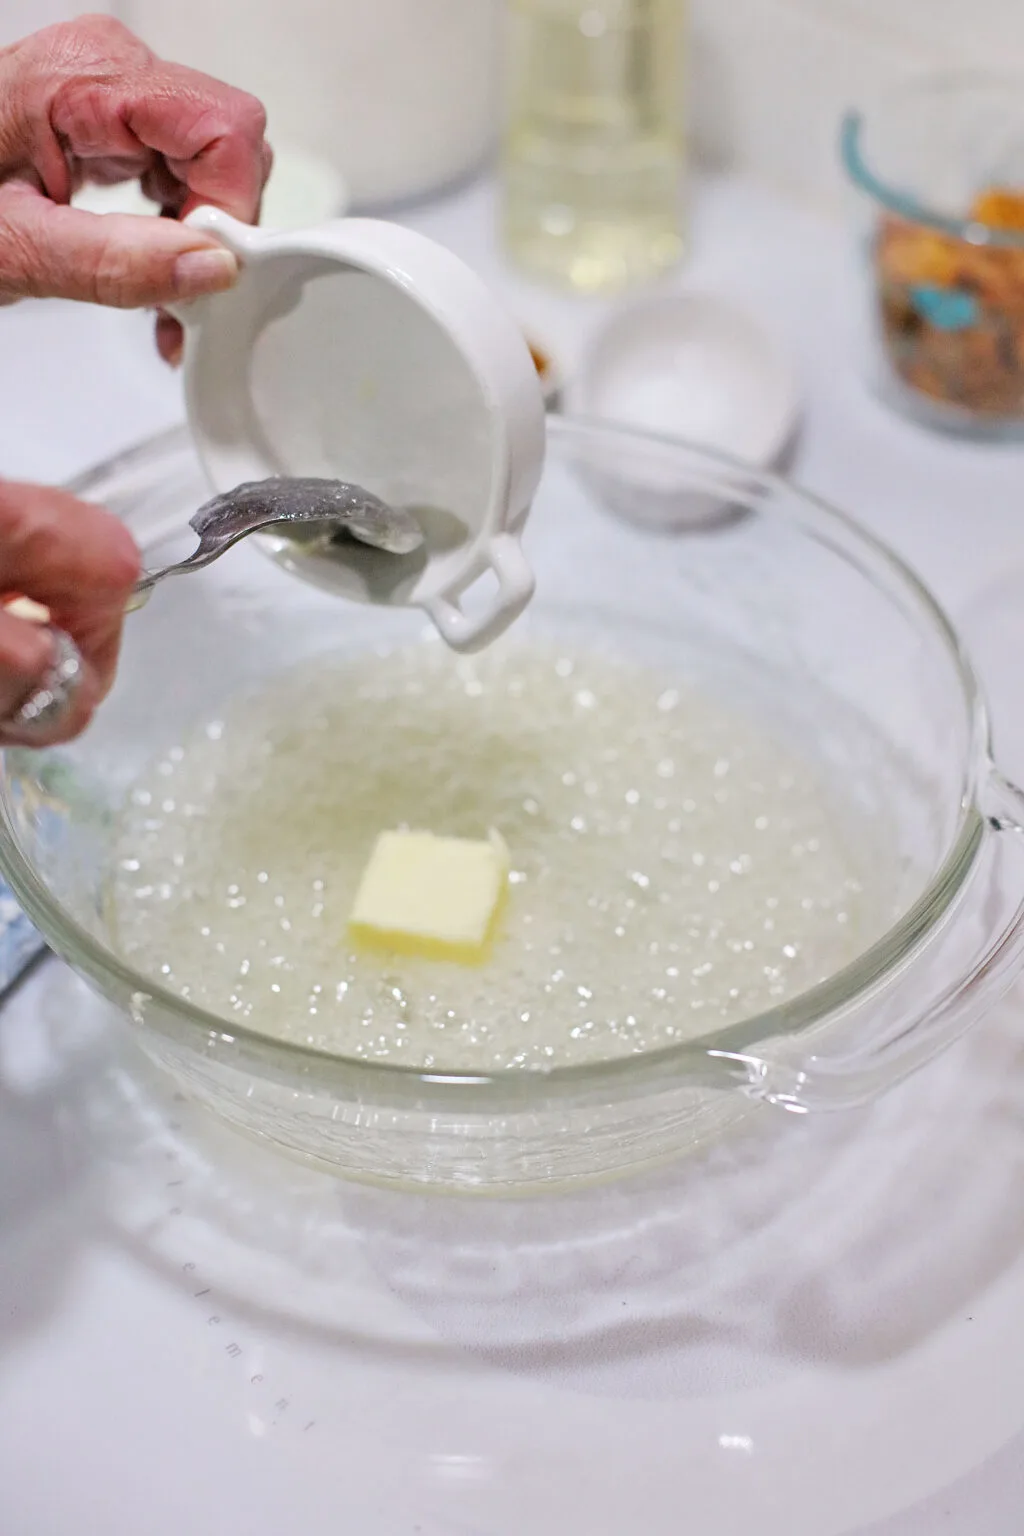 melted butter in bowl of hot candy mixture